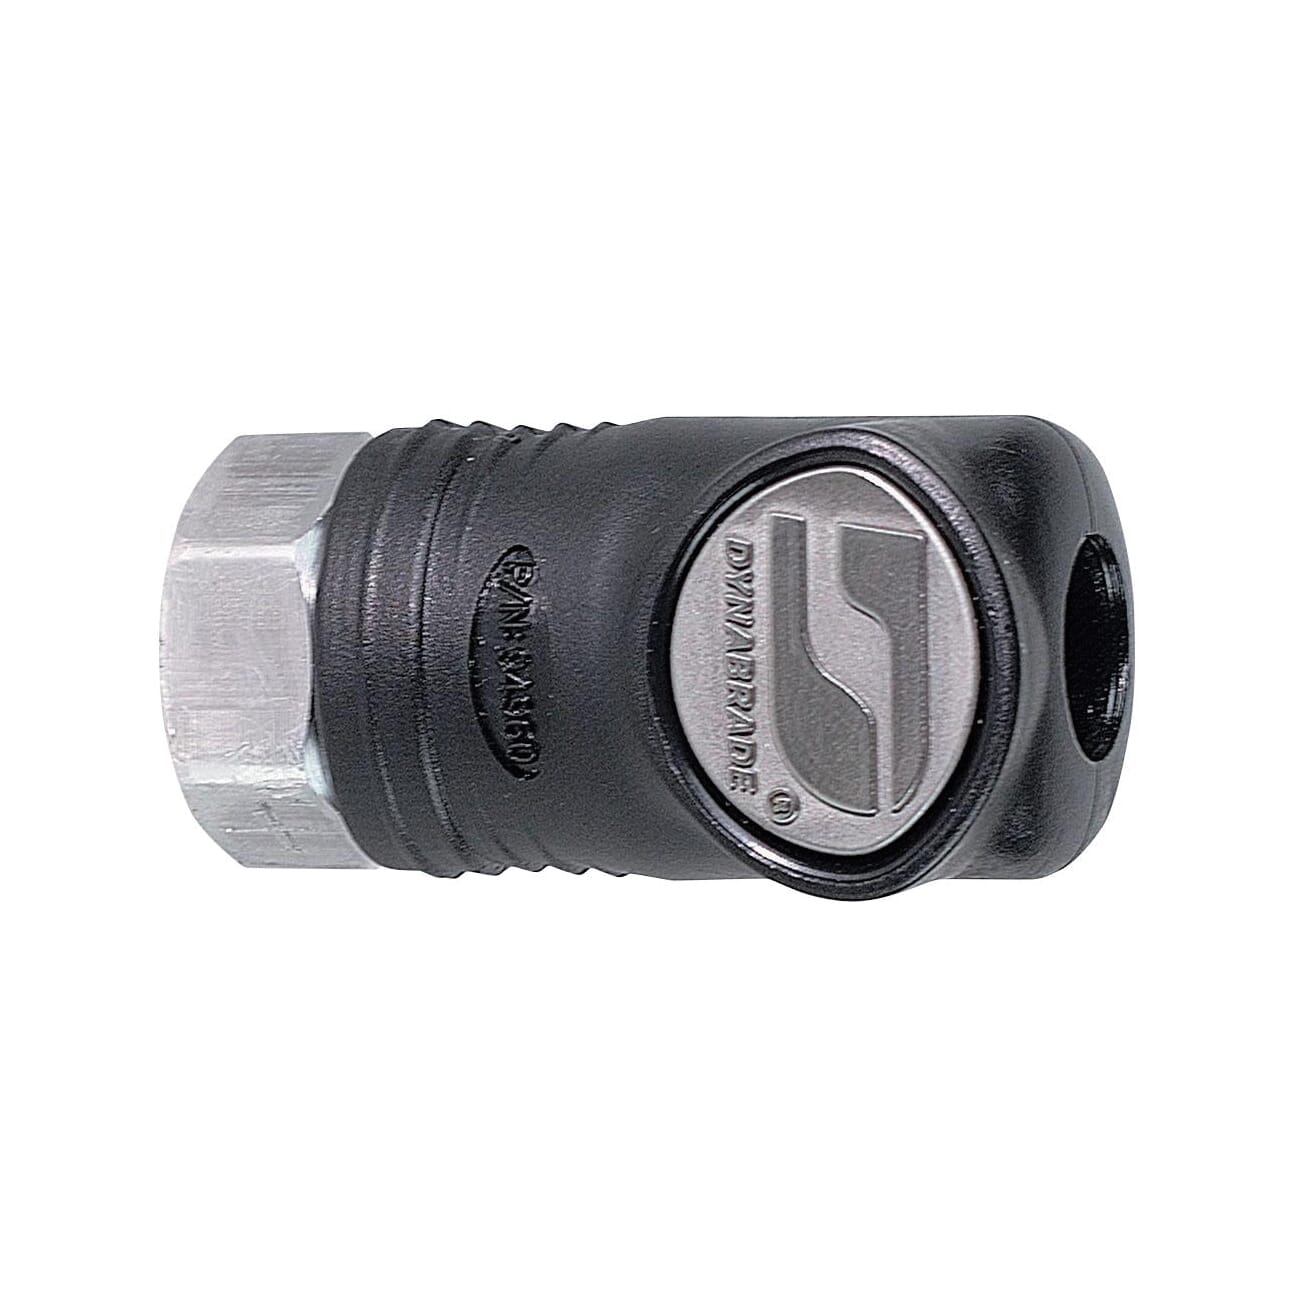 Dynabrade® 94960 Composite Style Coupler, For Use With Non-Dynabrade Vacuum System, 1/4 in FNPT, 83 scfm Air Flow